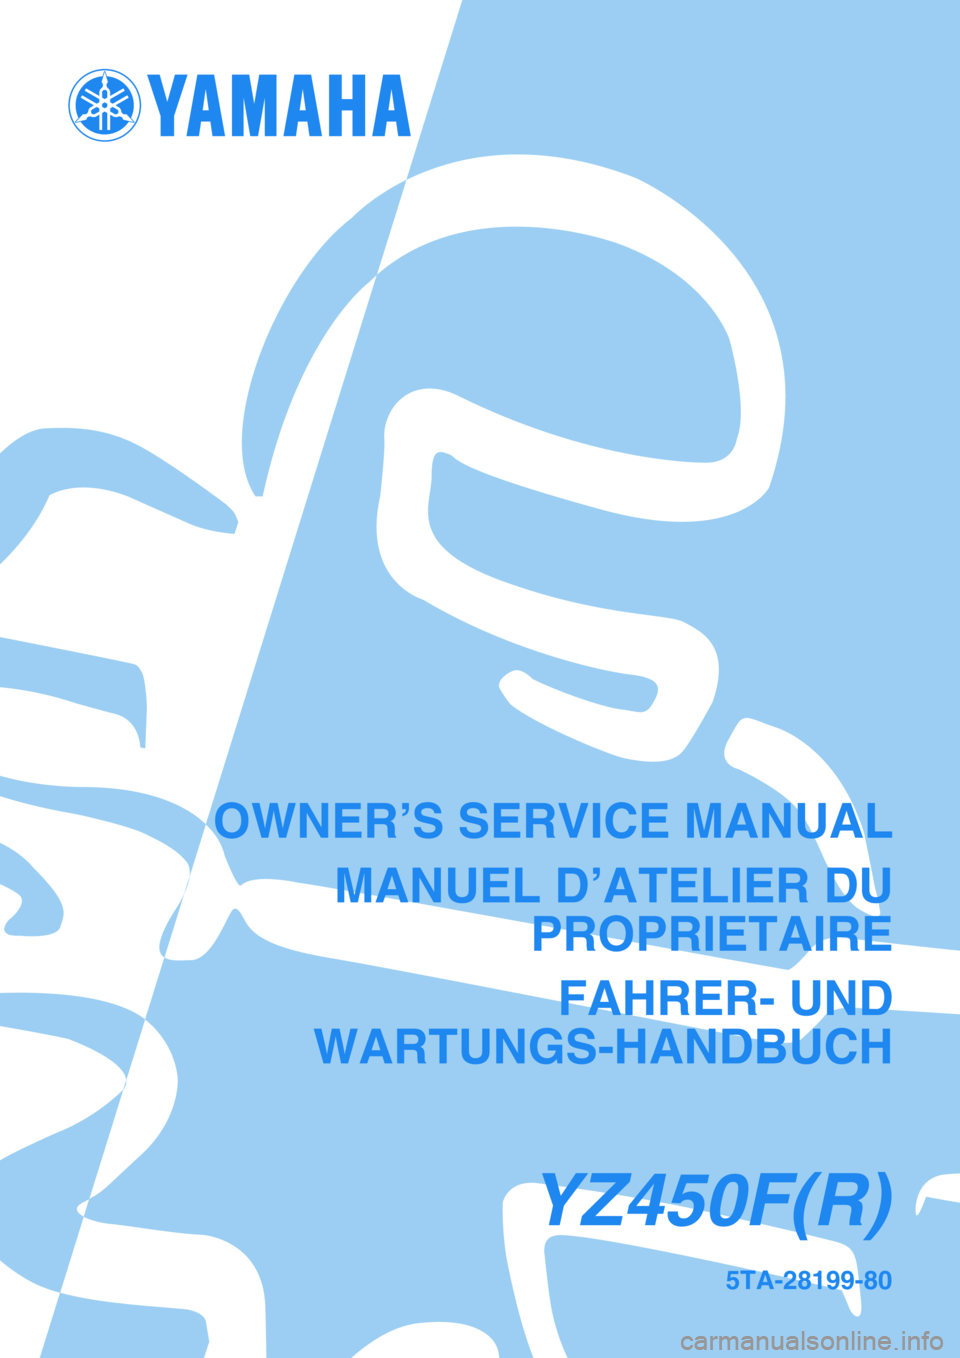 YAMAHA YZ450F 2003  Notices Demploi (in French) 5TA-28199-80
YZ450F(R)
OWNER’S SERVICE MANUAL
MANUEL D’ATELIER DU
PROPRIETAIRE
FAHRER- UND
WARTUNGS-HANDBUCH 